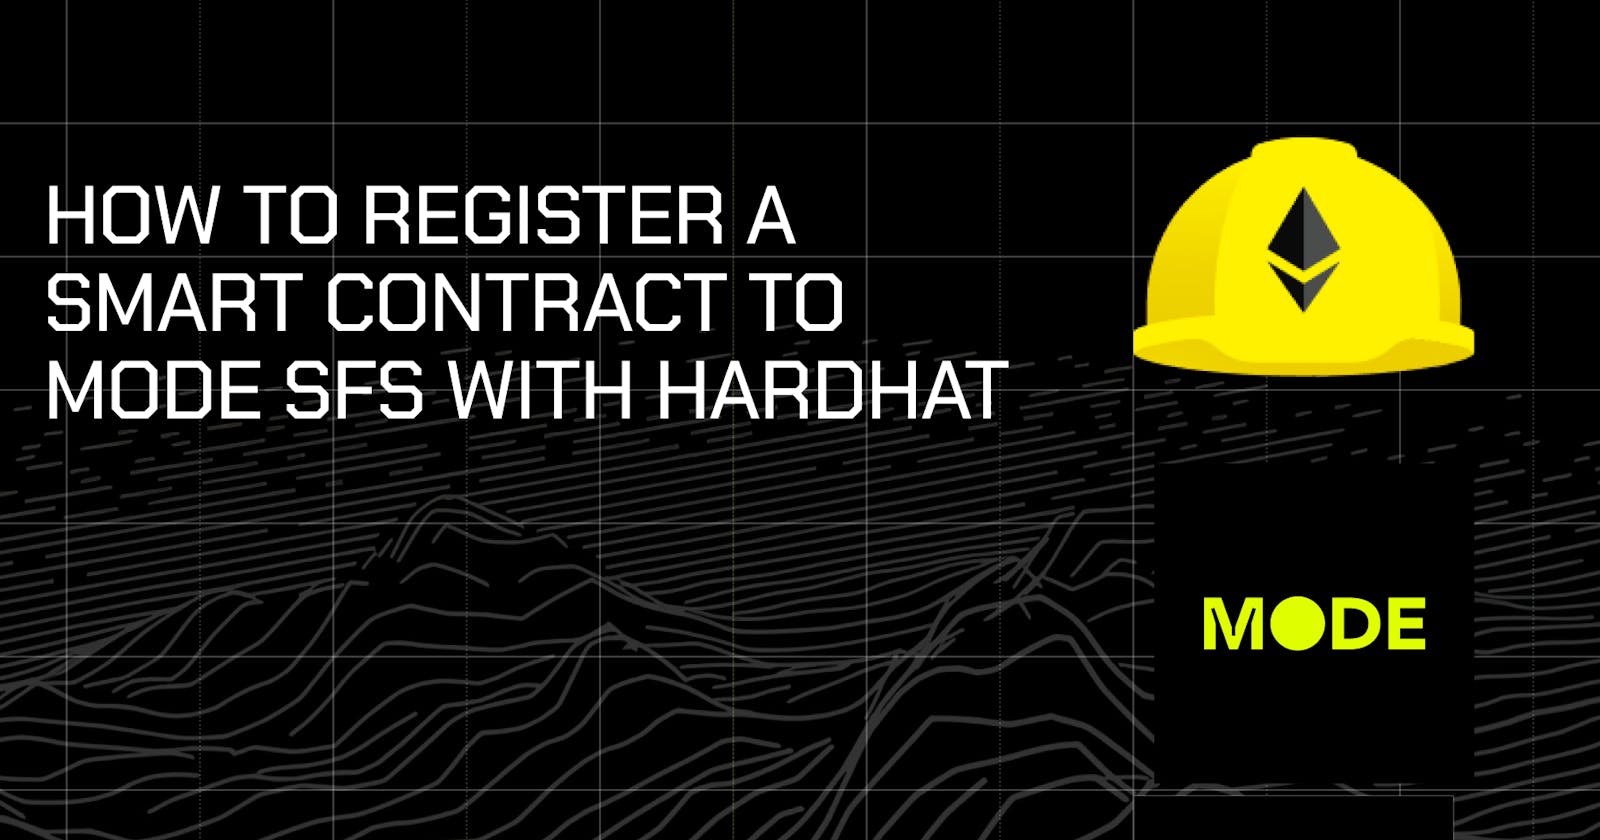 How to Register a Smart Contract to Mode SFS with Hardhat.